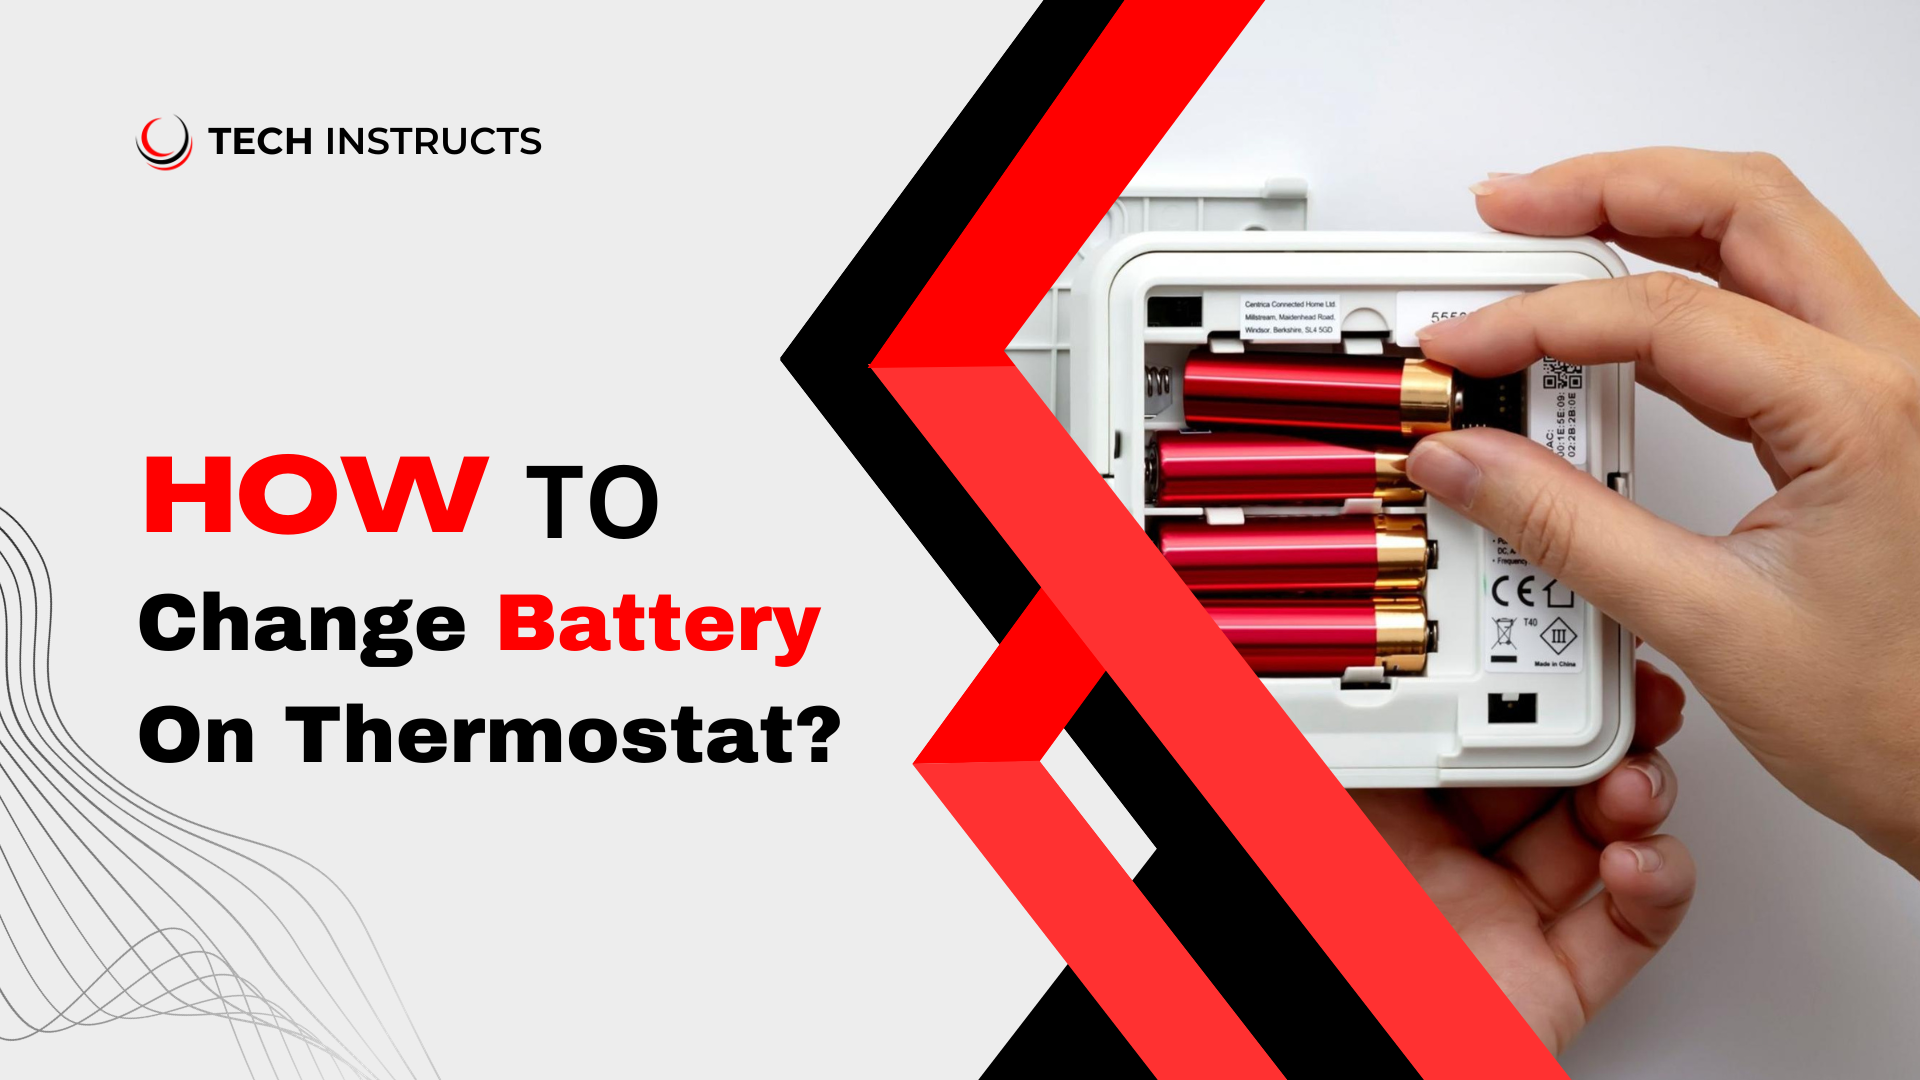 How To Change Battery On Thermostat - Tech Instructs